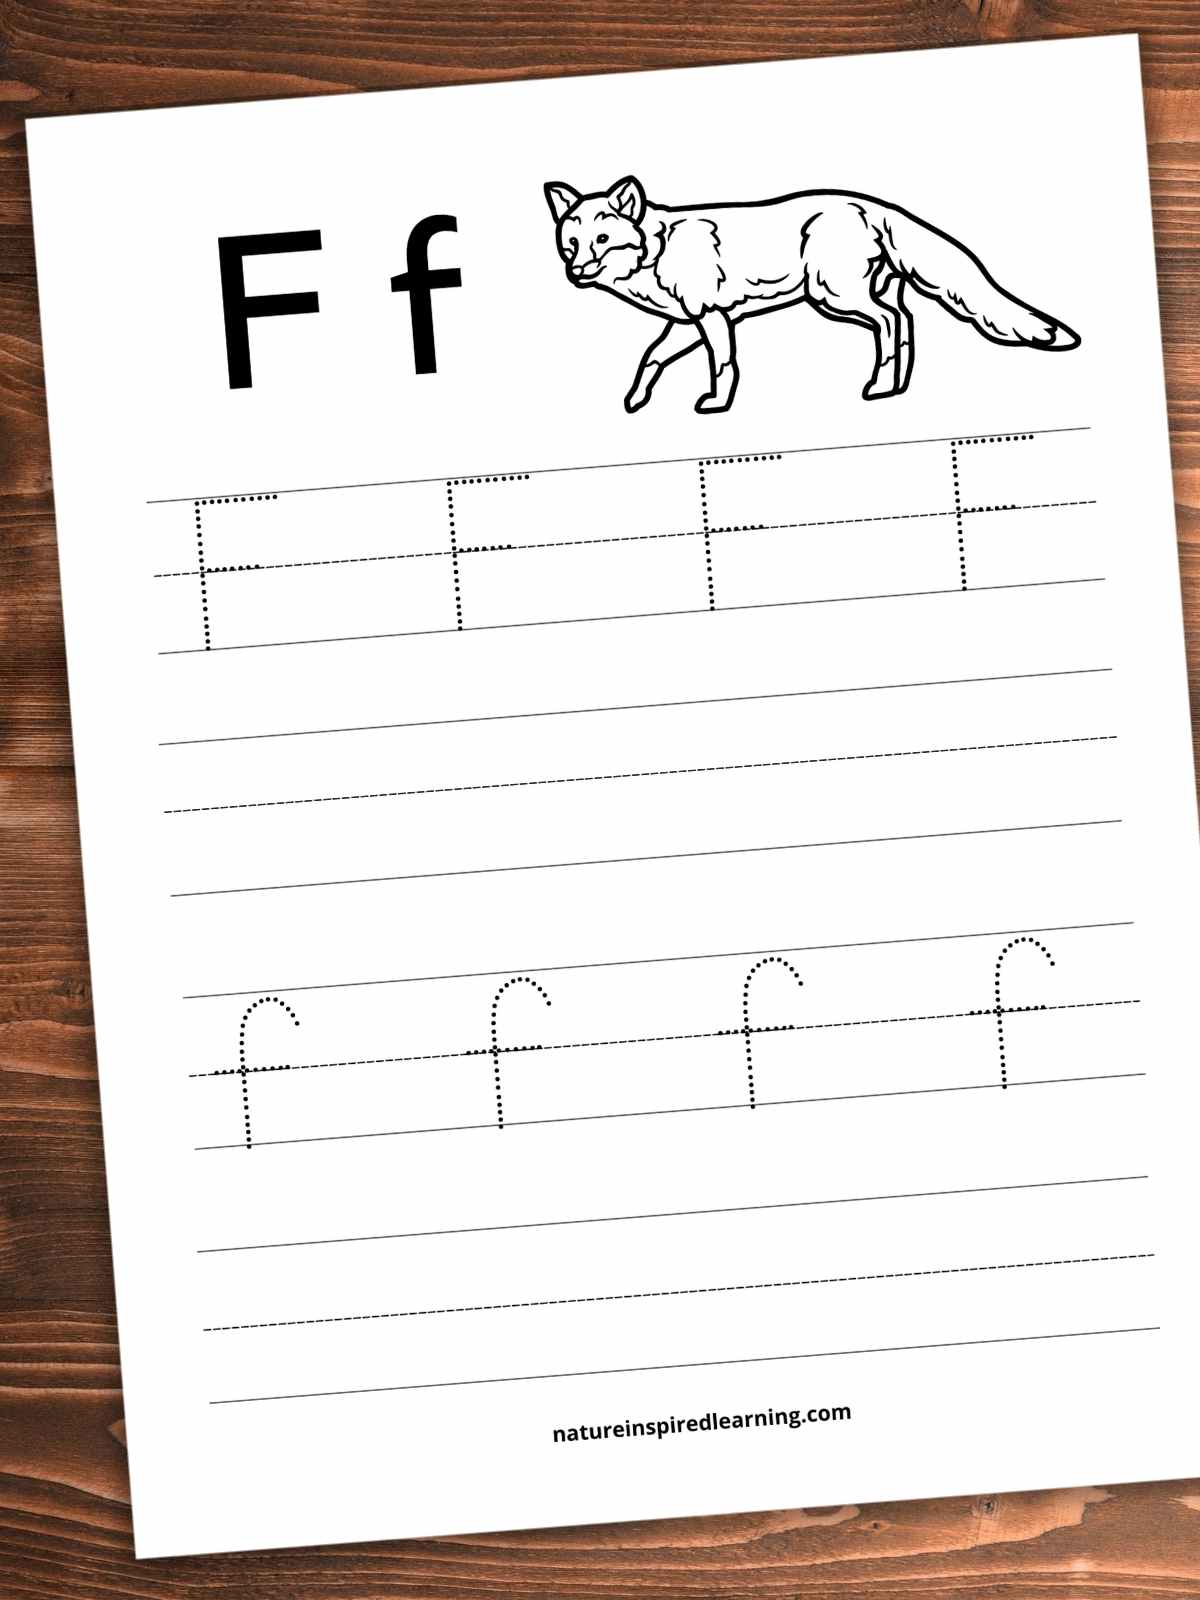 Worksheet slanted on a wooden background. F f with a black and white fox on the top with lines with four traceable F's a bank set of lines below, then traceable f's with a set of blank lines below.